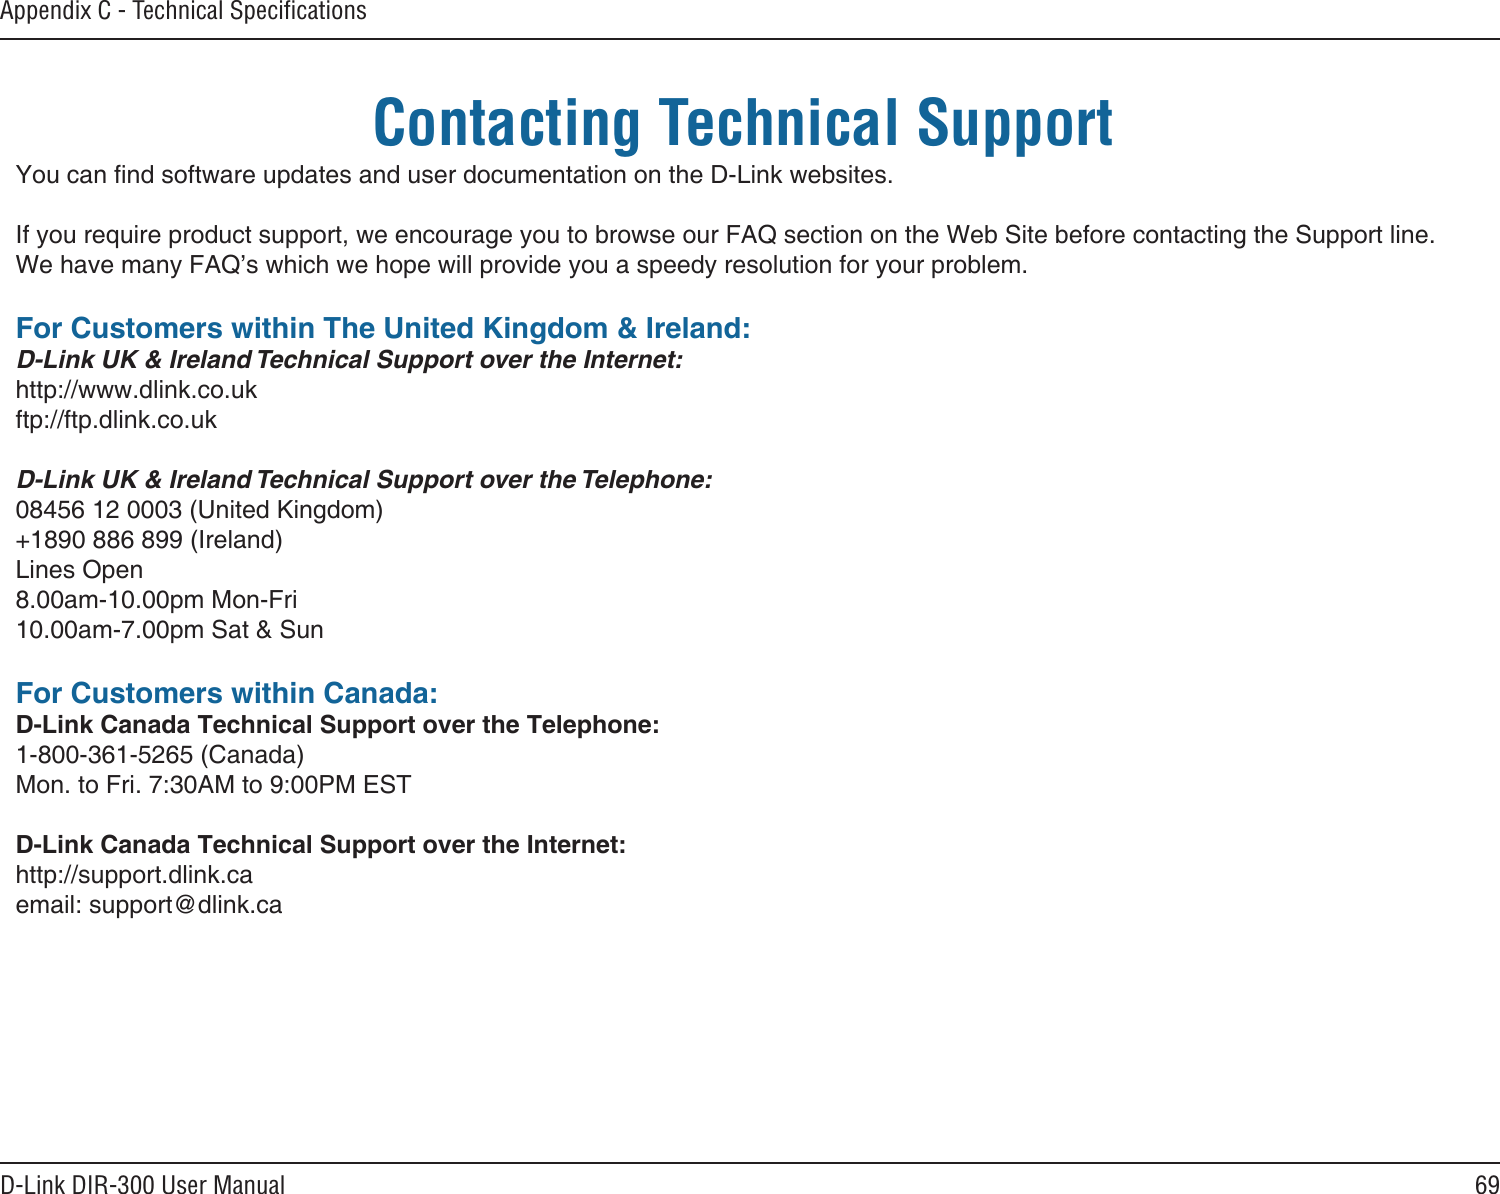 69D-Link DIR-300 User ManualAppendix C - Technical SpeciﬁcationsContacting Technical SupportYou can nd software updates and user documentation on the D-Link websites.If you require product support, we encourage you to browse our FAQ section on the Web Site before contacting the Support line.We have many FAQ’s which we hope will provide you a speedy resolution for your problem.For Customers within The United Kingdom &amp; Ireland:D-Link UK &amp; Ireland Technical Support over the Internet:http://www.dlink.co.ukftp://ftp.dlink.co.ukD-Link UK &amp; Ireland Technical Support over the Telephone:08456 12 0003 (United Kingdom)+1890 886 899 (Ireland)Lines Open8.00am-10.00pm Mon-Fri10.00am-7.00pm Sat &amp; SunFor Customers within Canada:D-Link Canada Technical Support over the Telephone:1-800-361-5265 (Canada)Mon. to Fri. 7:30AM to 9:00PM ESTD-Link Canada Technical Support over the Internet:http://support.dlink.caemail: support@dlink.ca